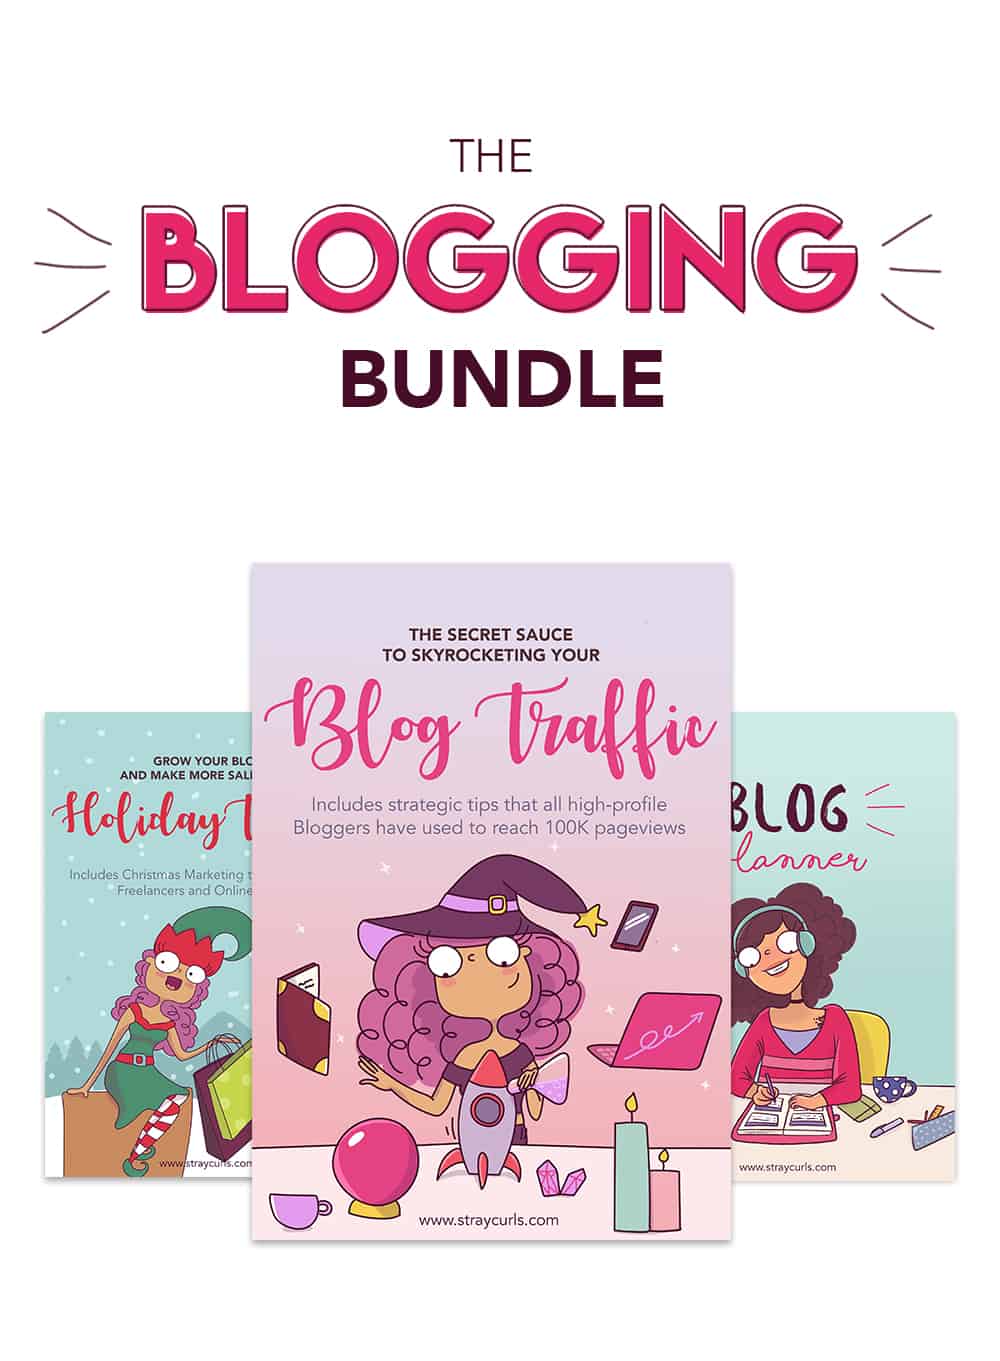 The Blogging Bundle contains the blog traffic eBook, the Holiday Traffic eBook and the Blog Planner!